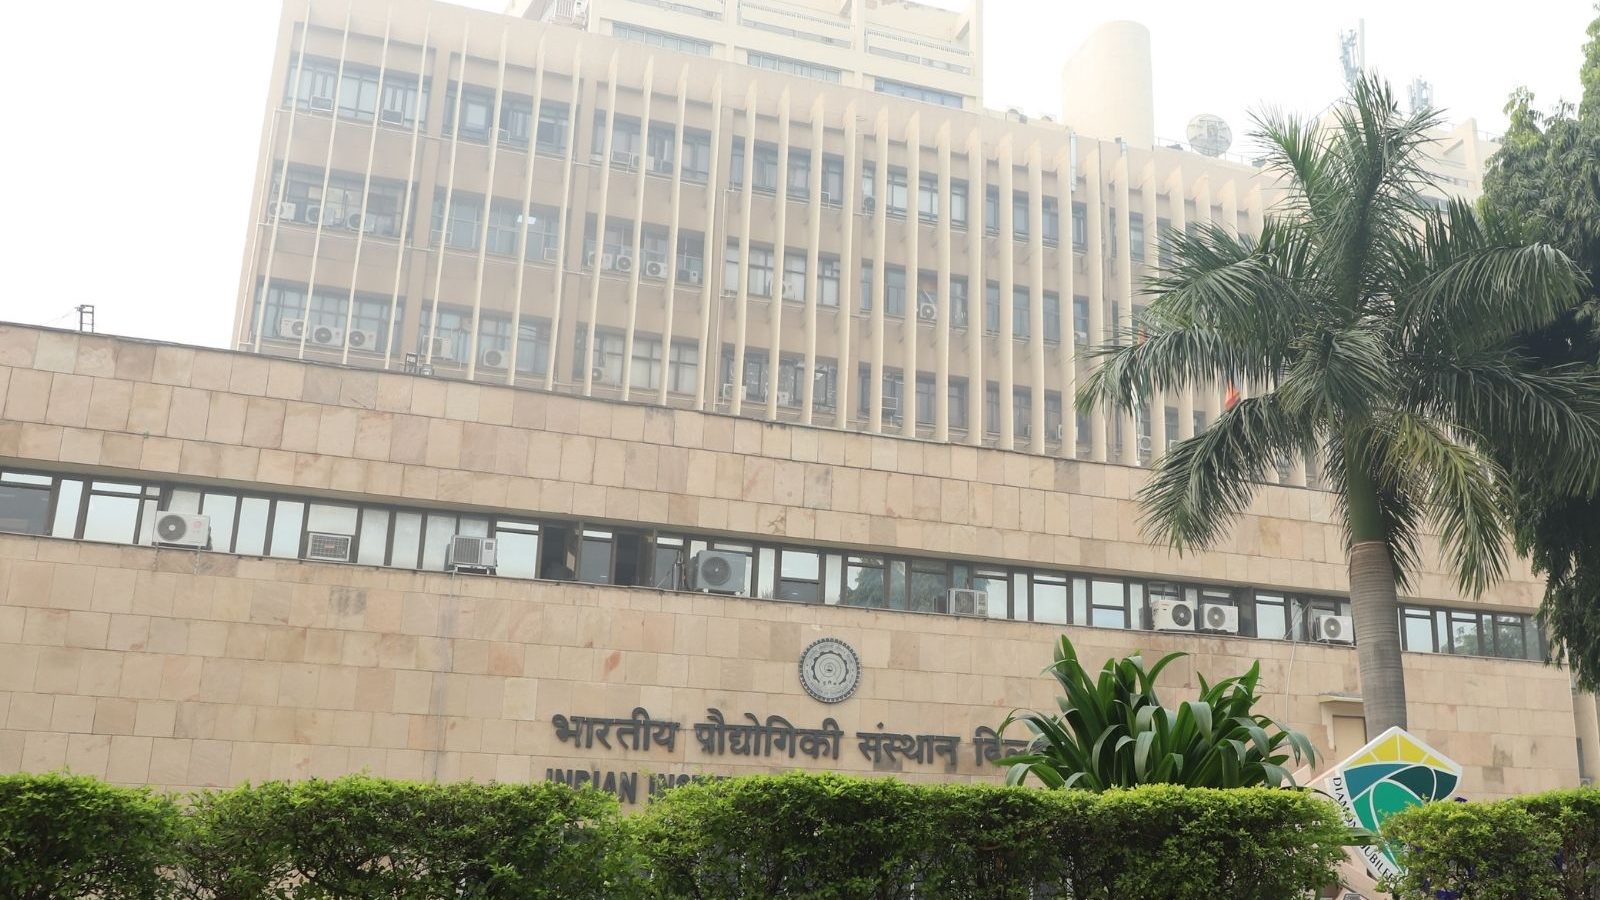 THE to change global university ranking methodology after IIT claims lack of ‘transparency’